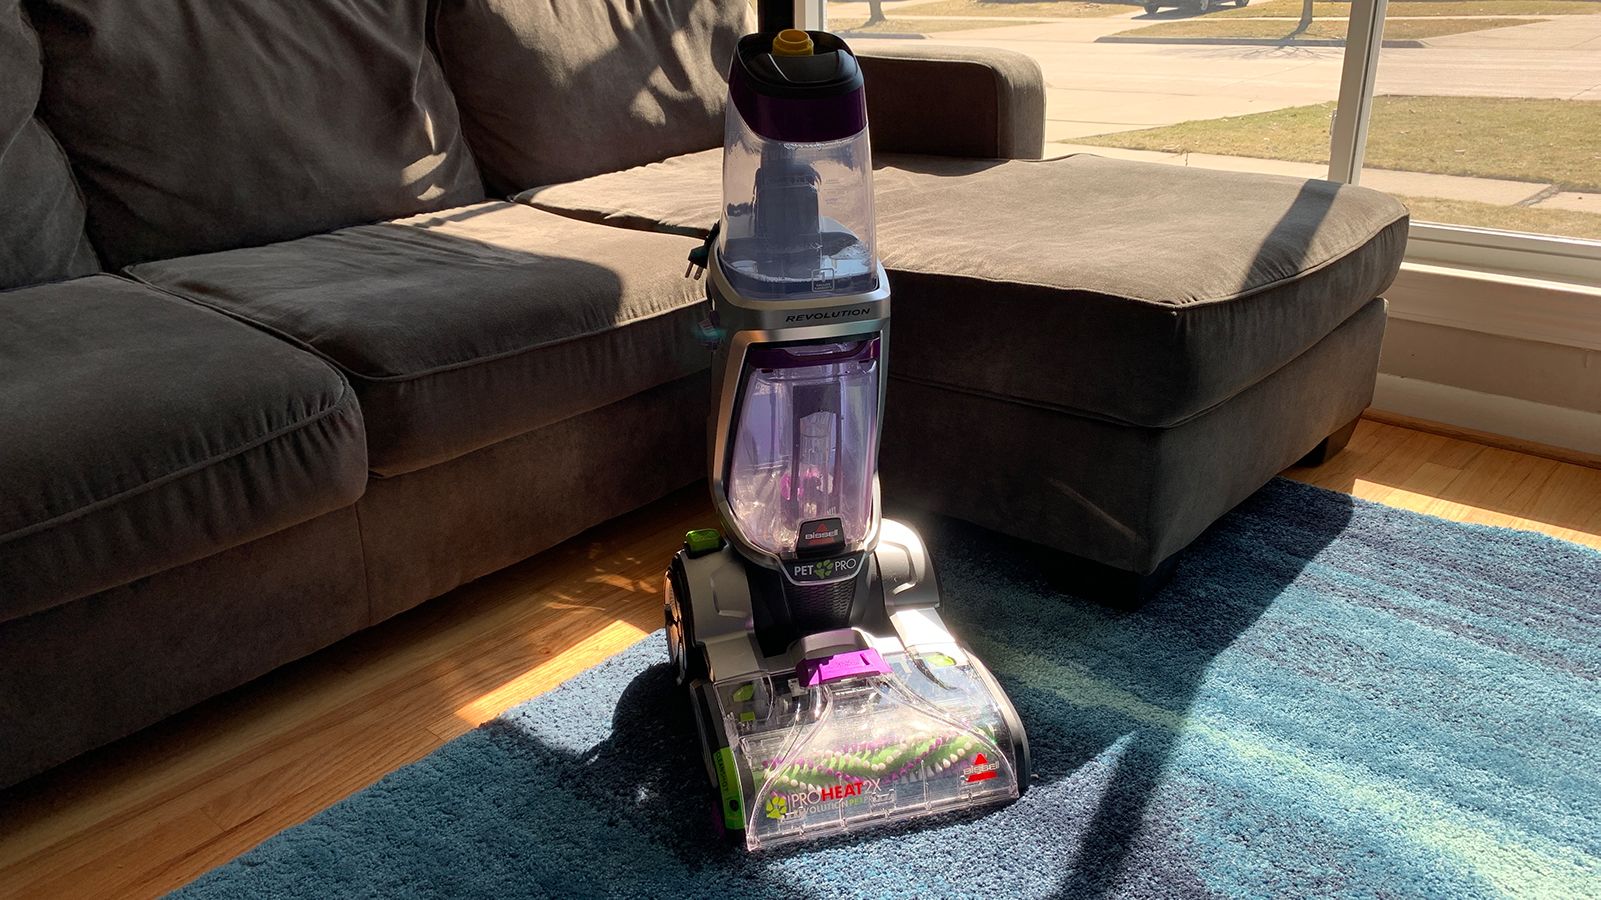 The 8 best carpet cleaners, according to experts